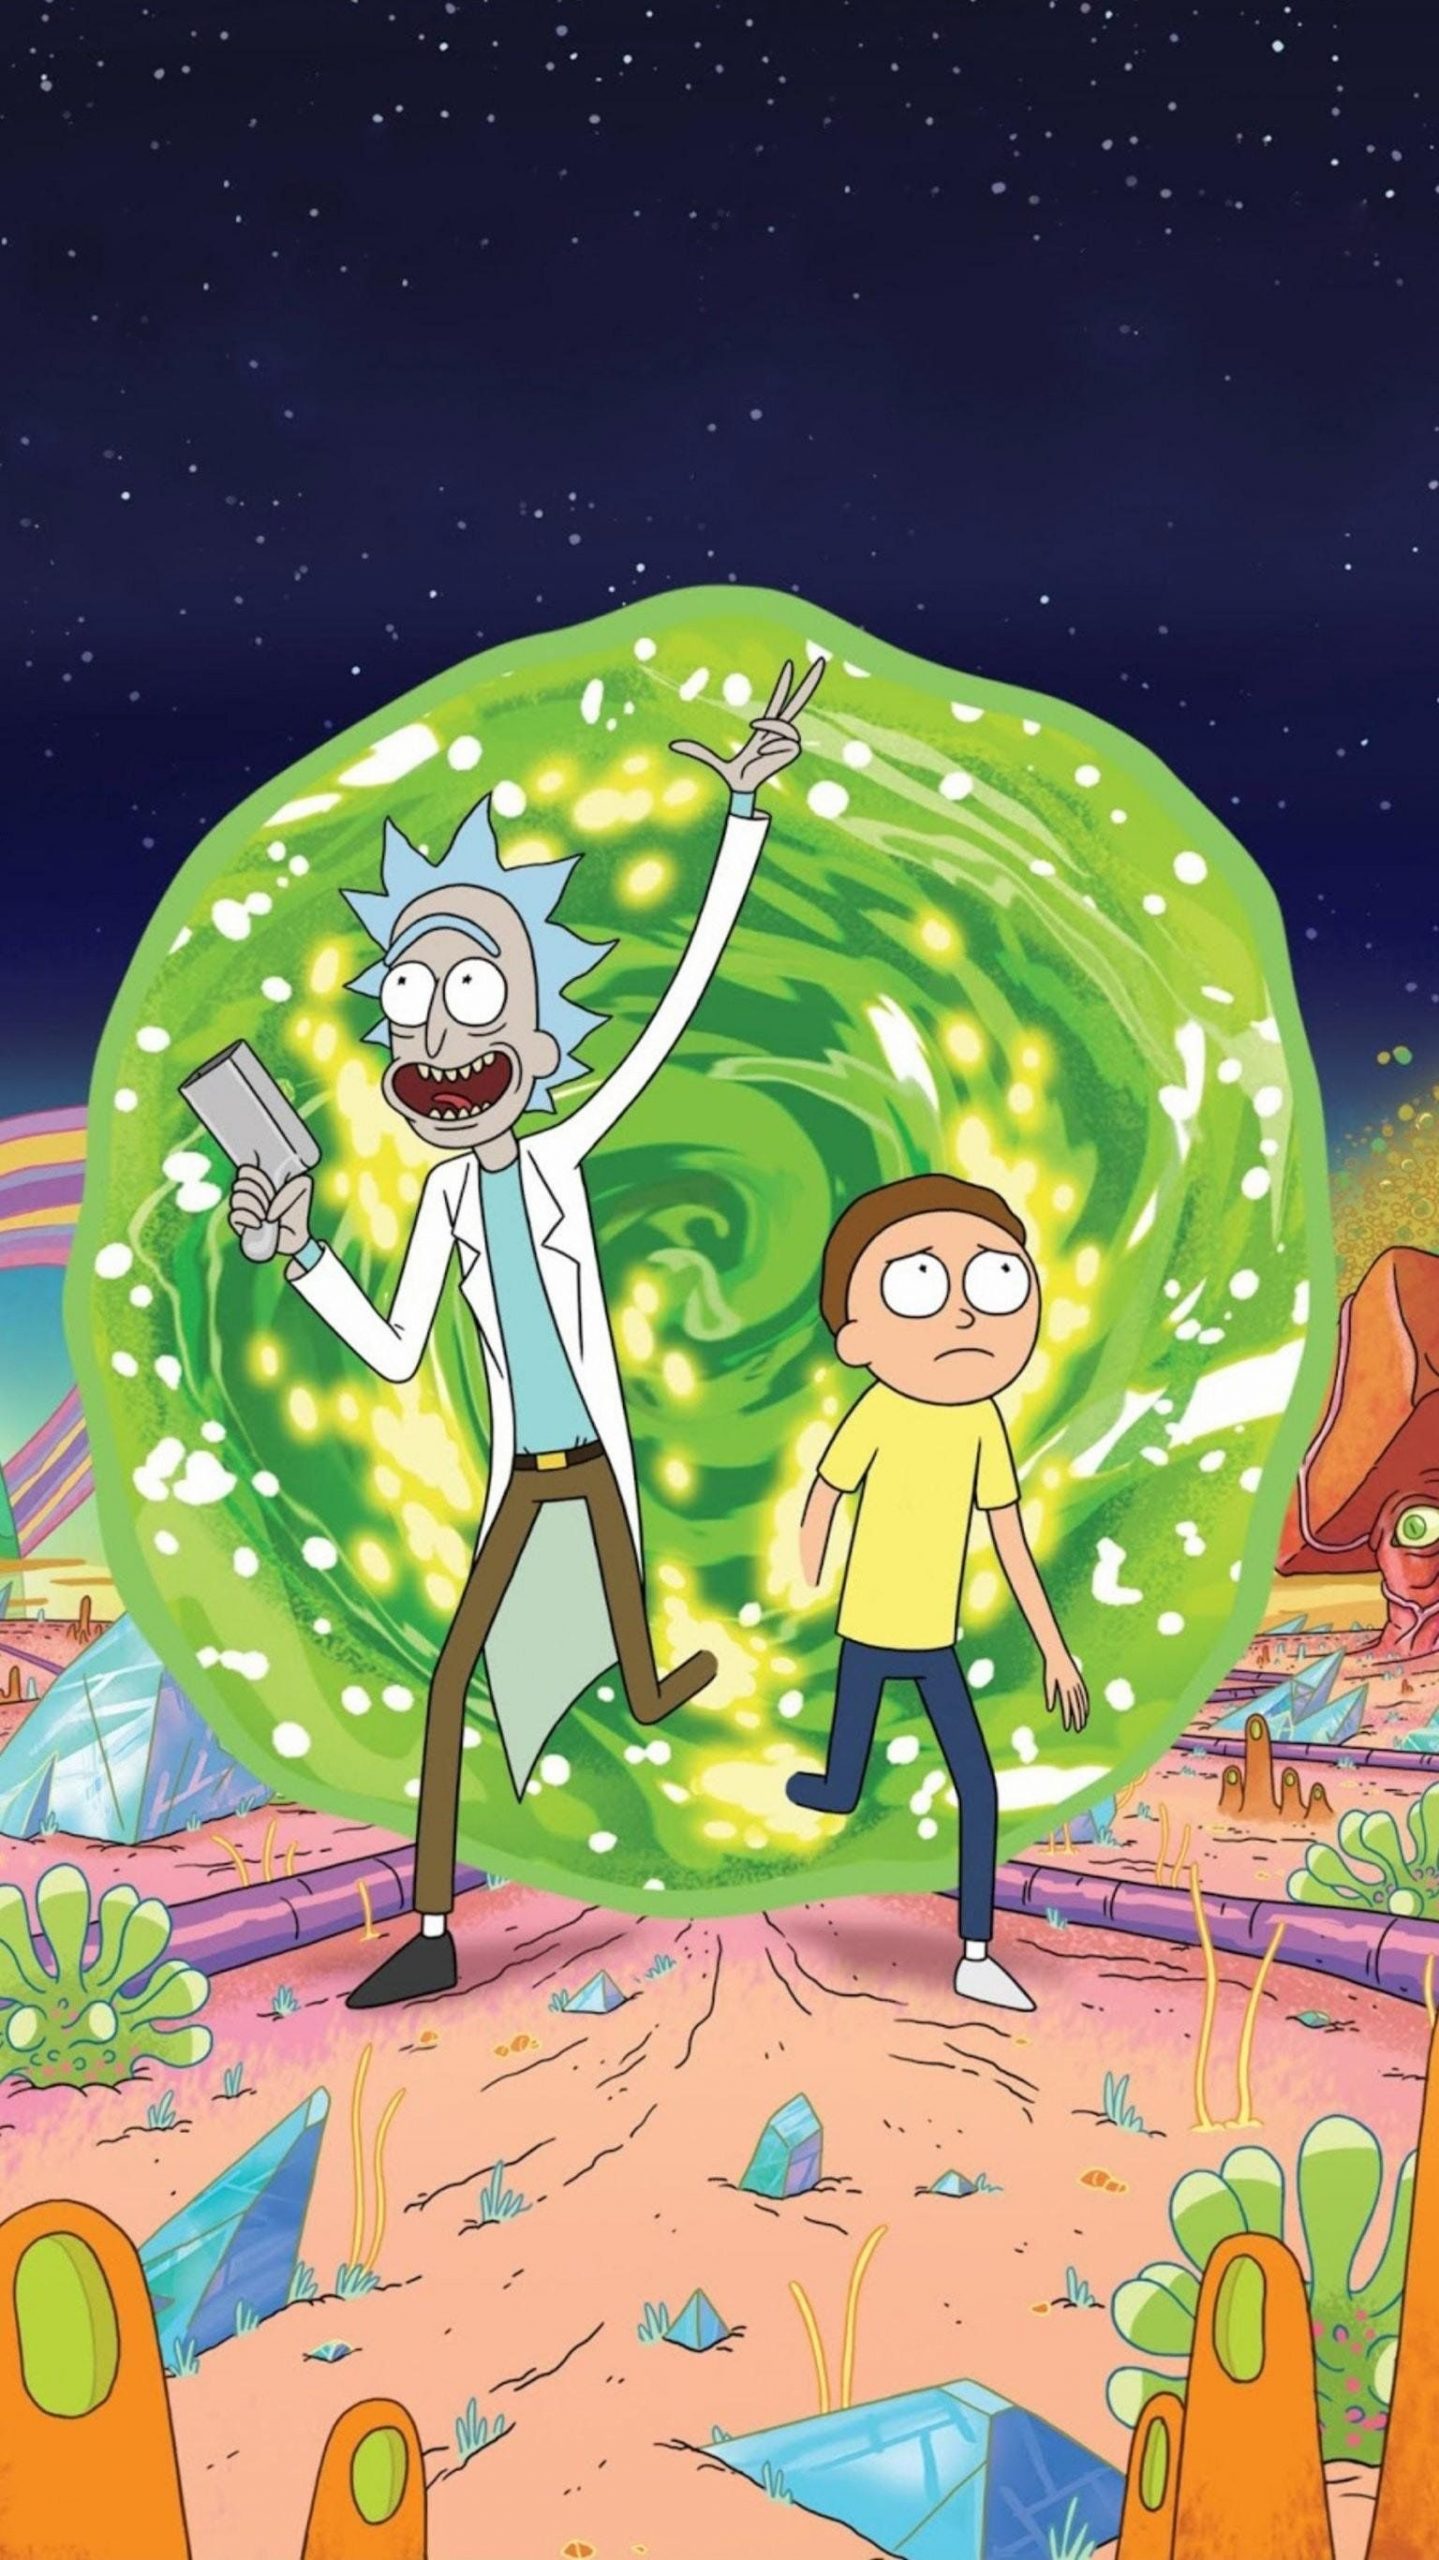 ricky and morty wallpapers hd 4k 15